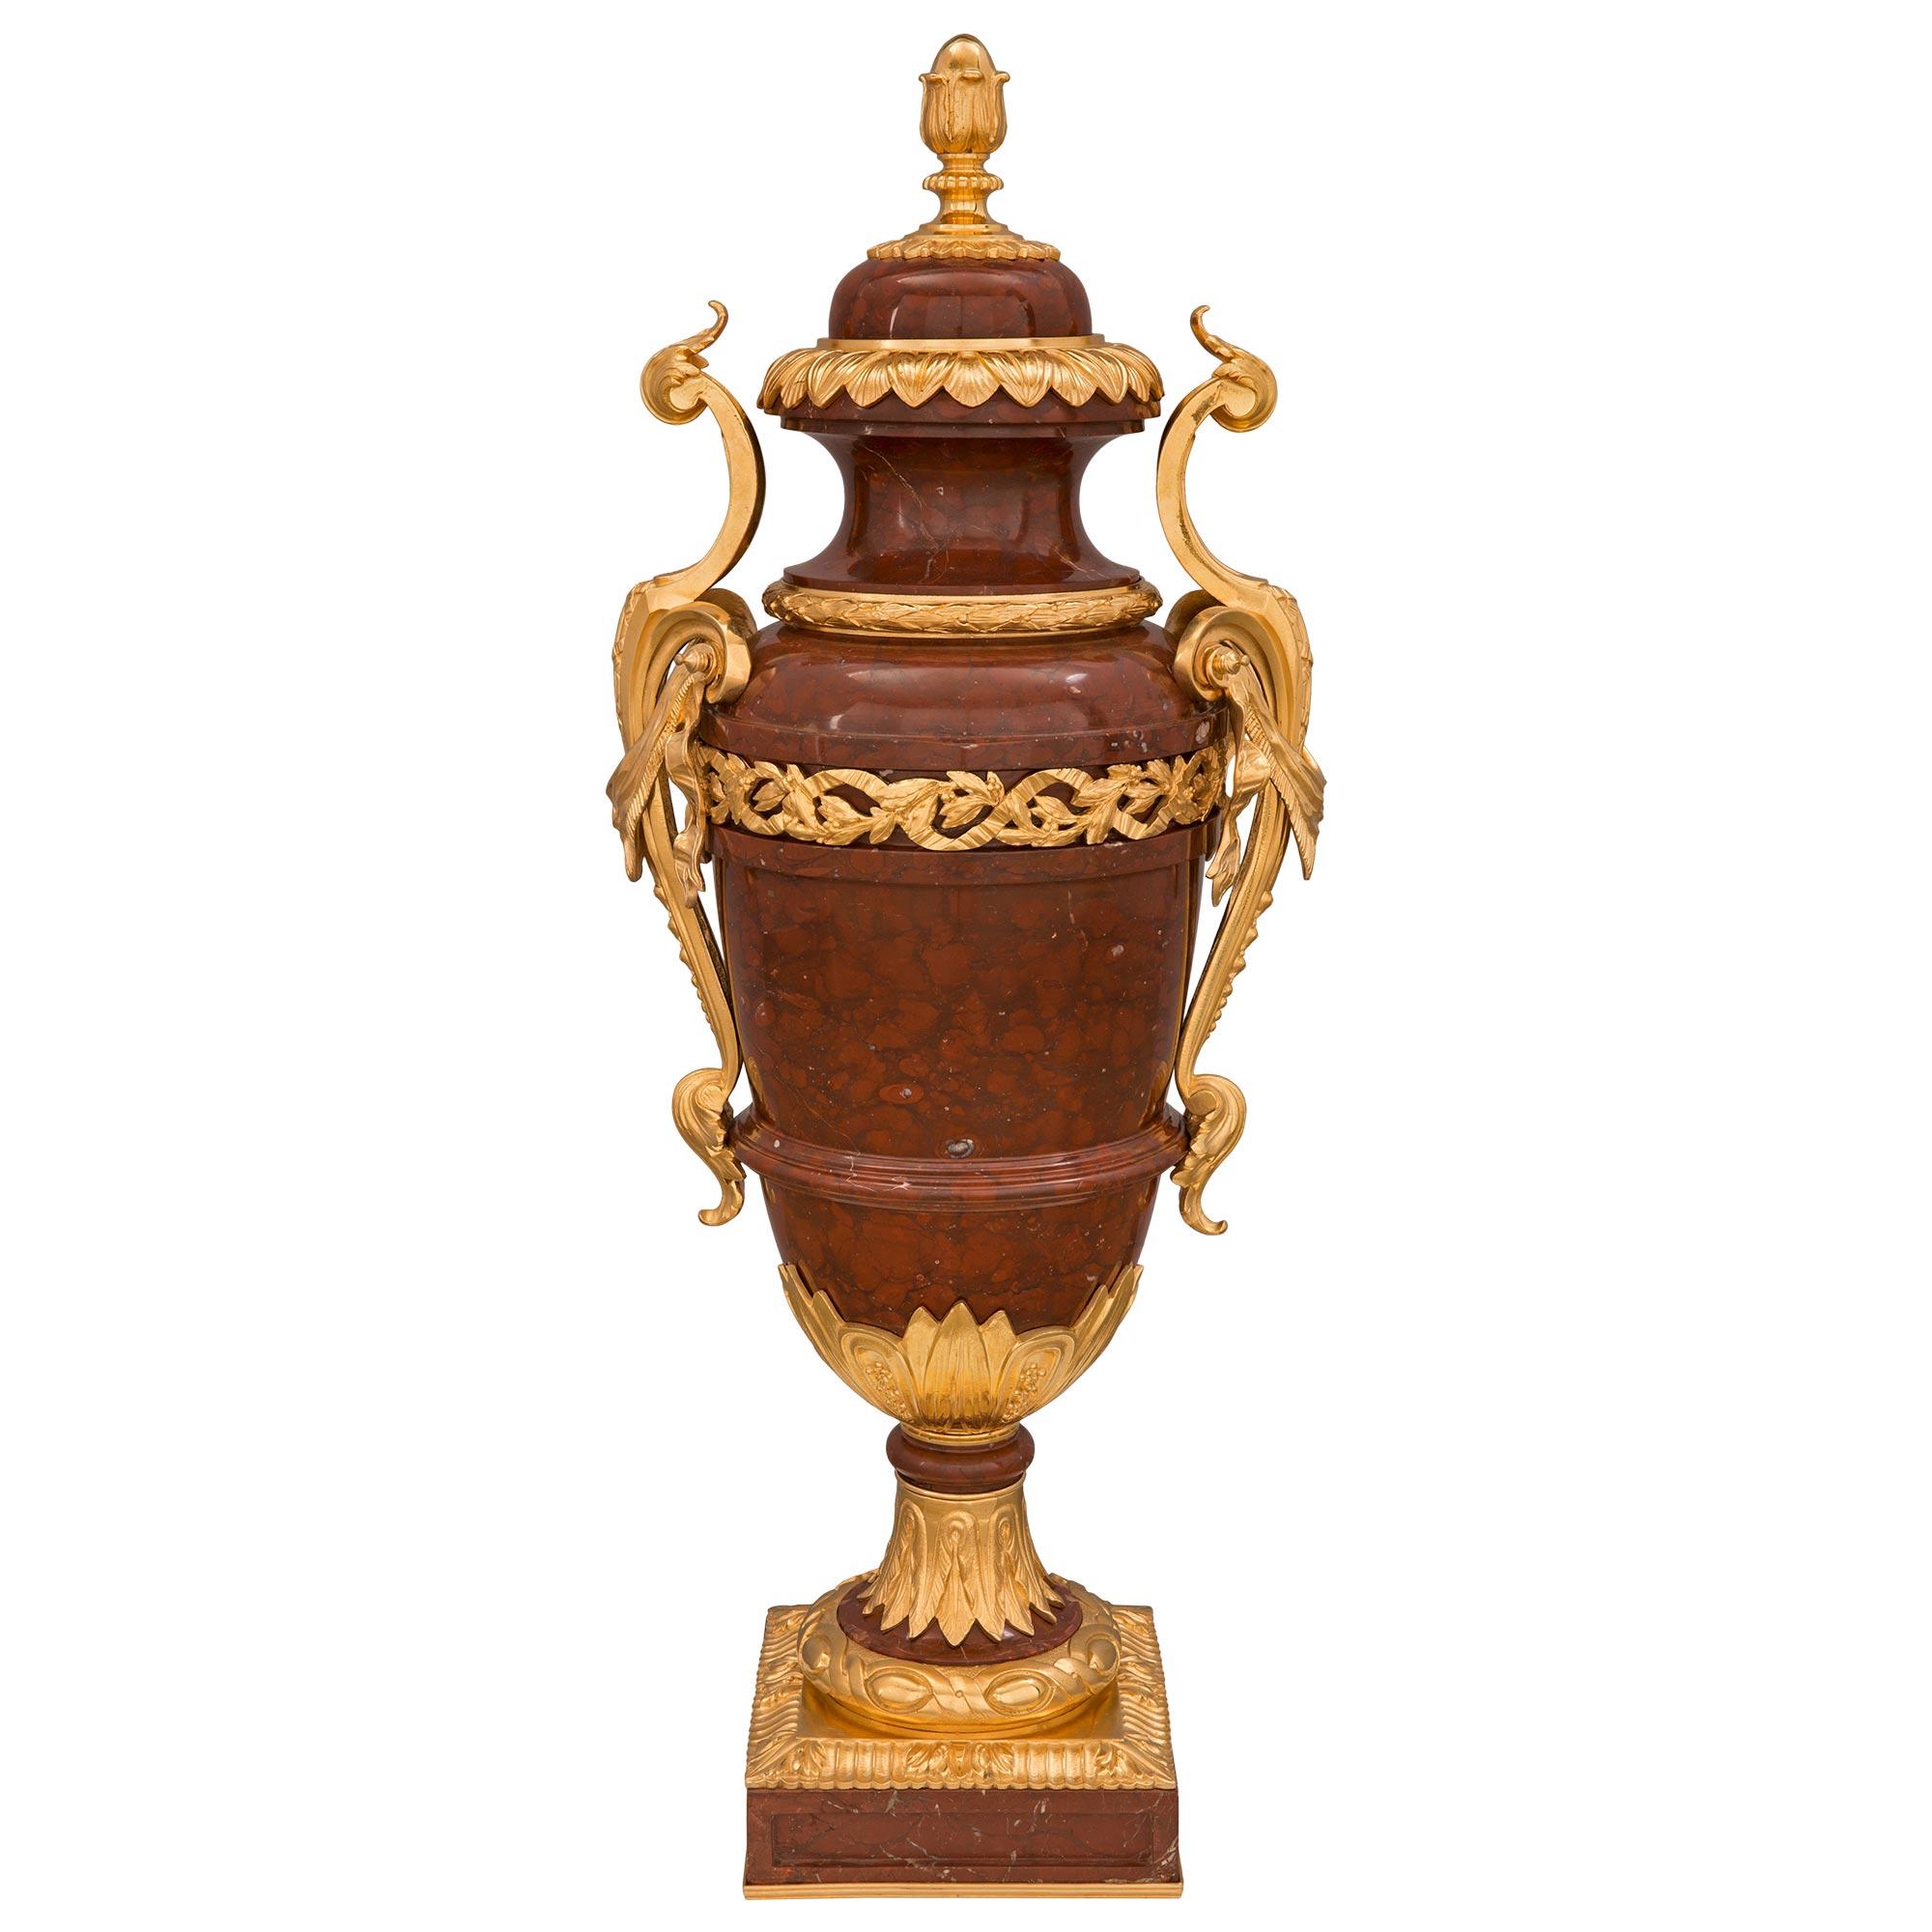 A stunning and very high quality French 19th century Louis XVI st. Rouge Griotte marble and ormolu lidded urn. The urn is raised by a square base with a most decorative recessed plaque at each side, a fine bottom ormolu fillet, and a striking fluted